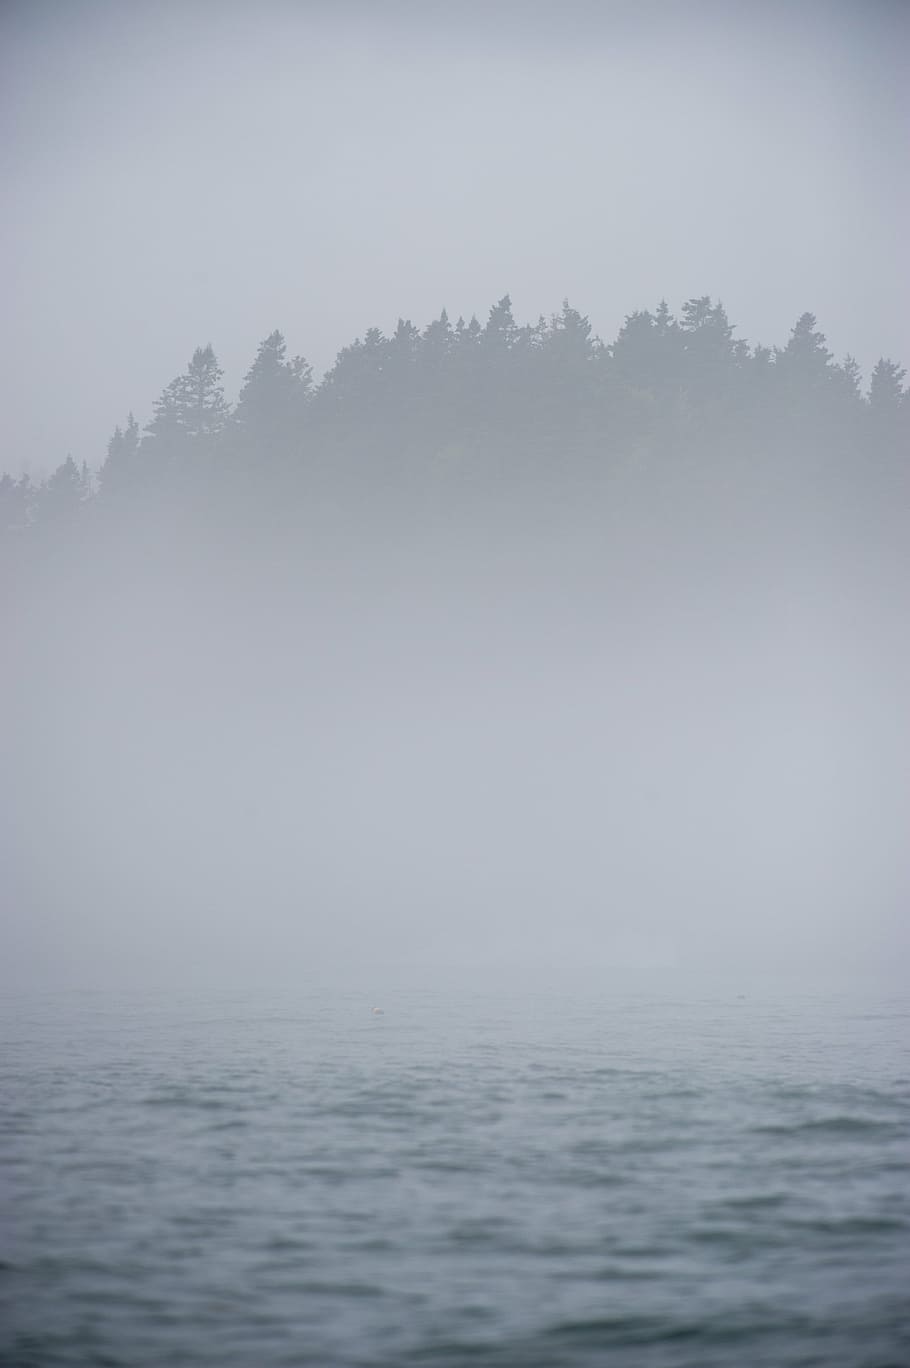 fog covered island, sea, ocean, water, waves, nature, trees, fog, tree, beauty in nature